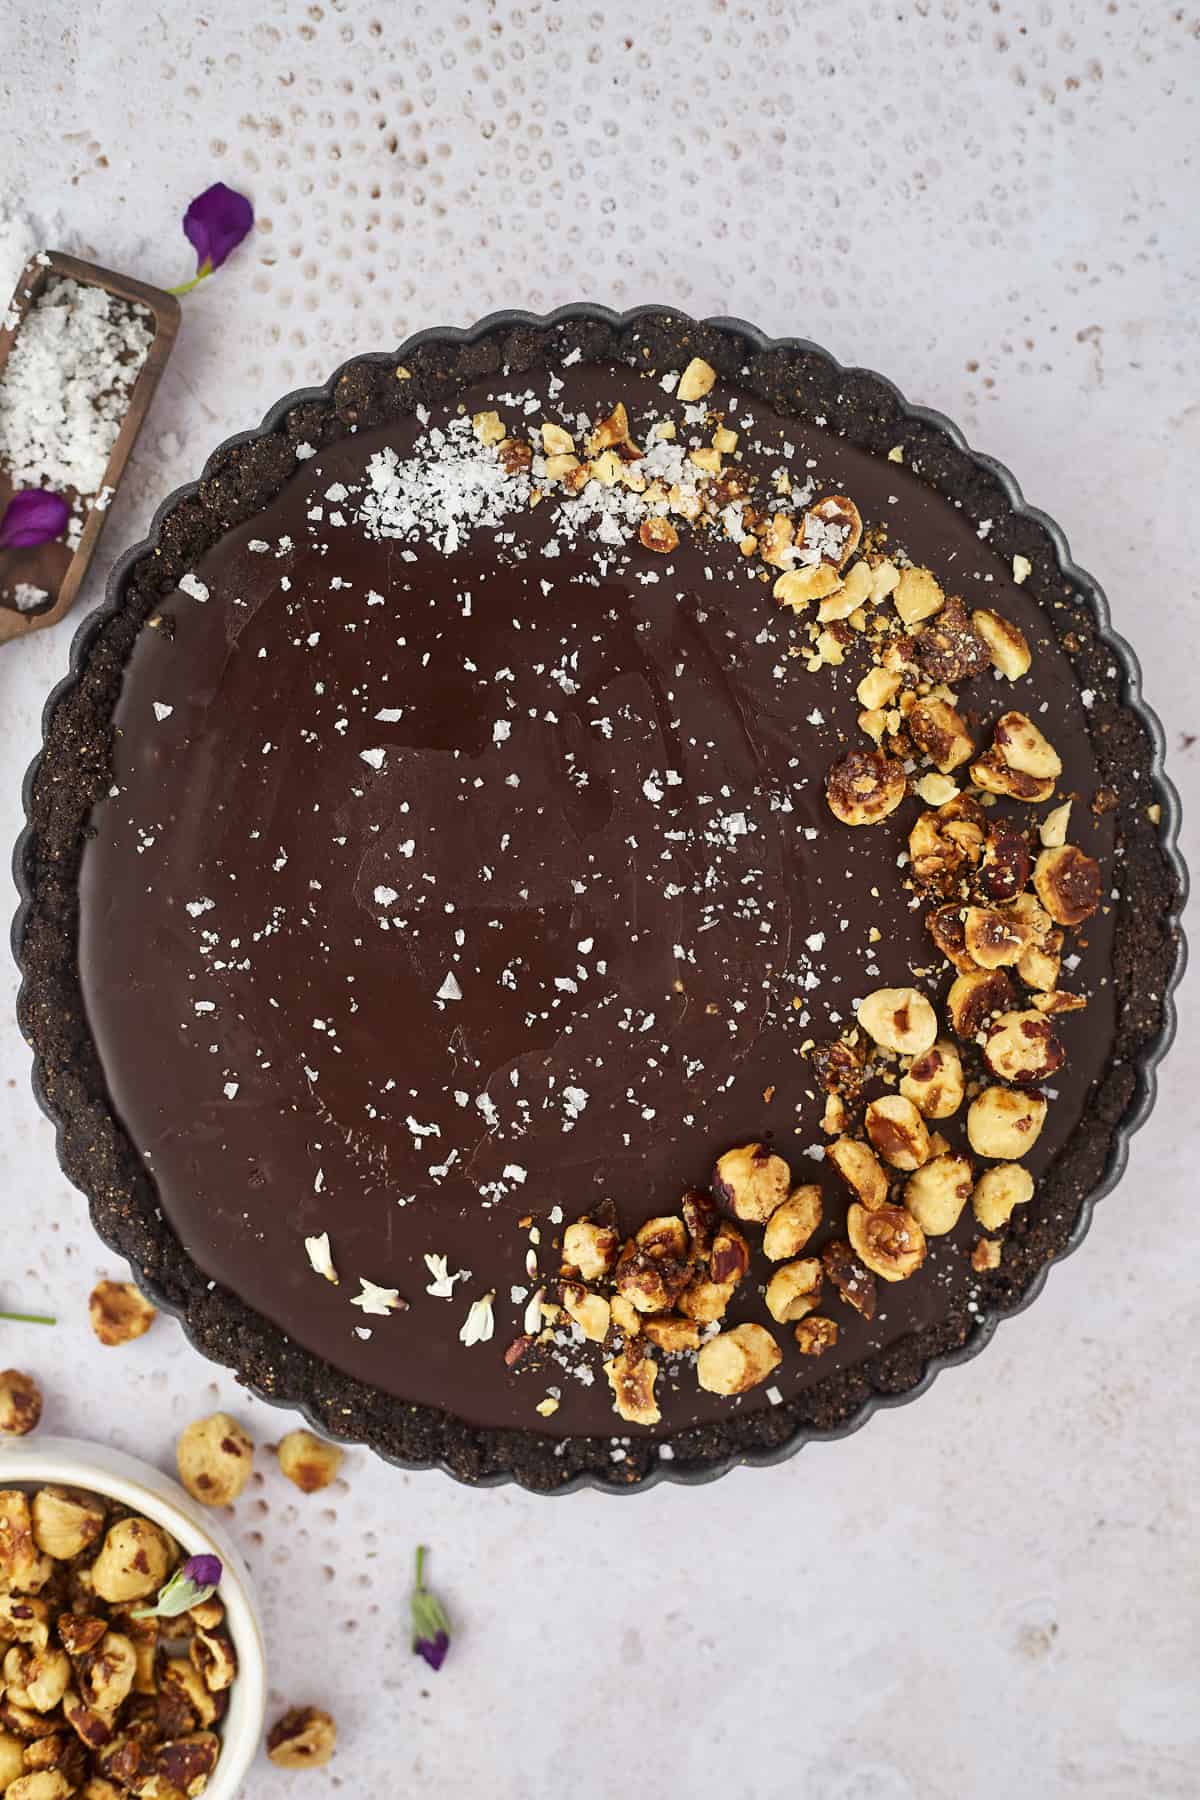 a whole chocolate tart topped with candied hazelnuts and sea salt